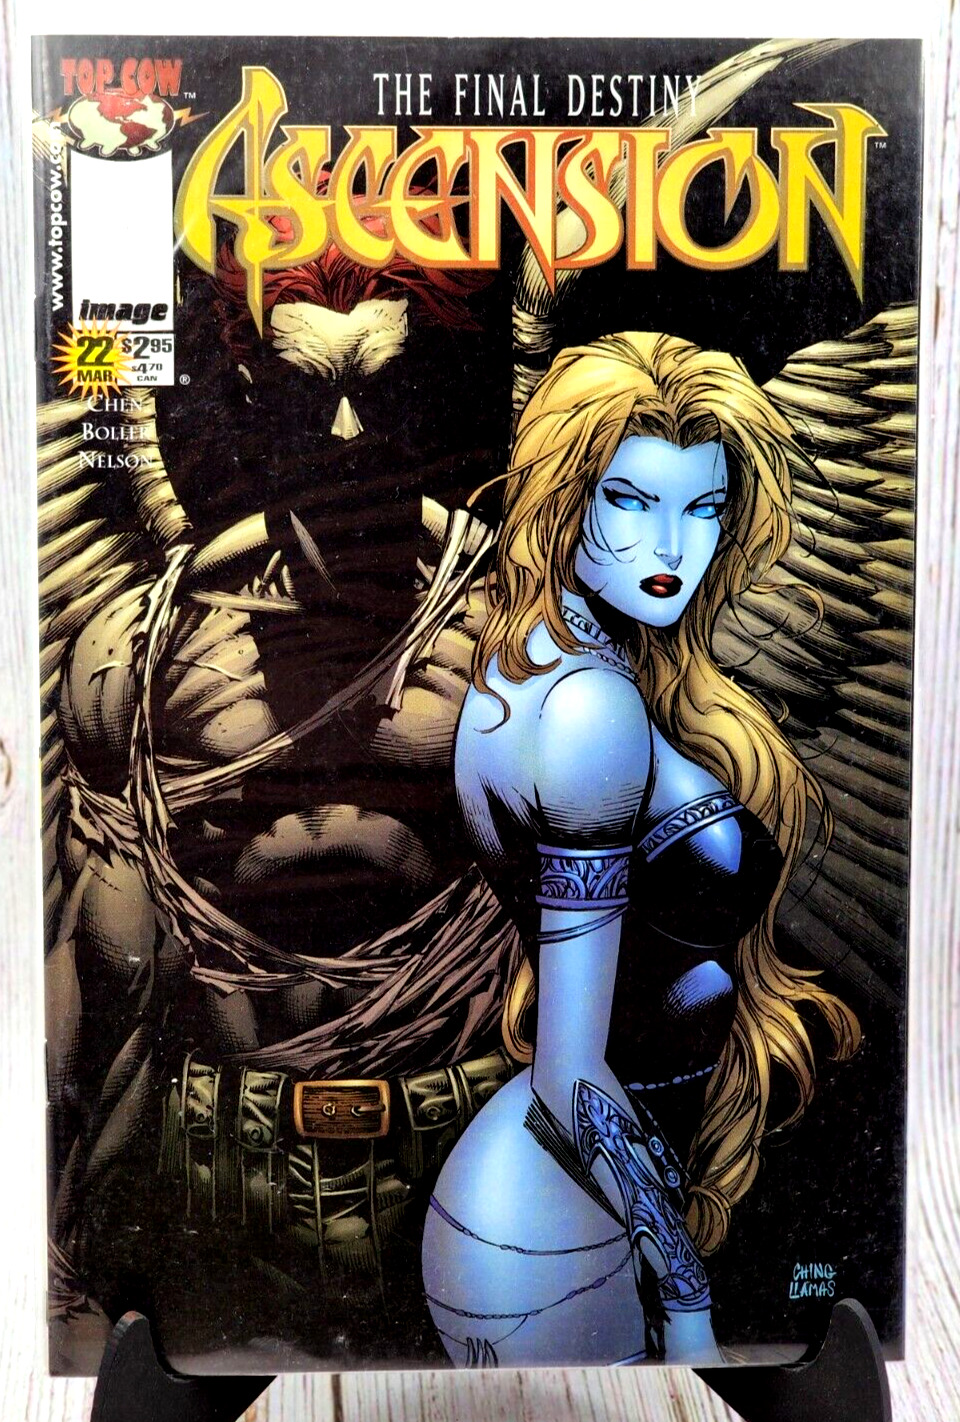 ASCENSION #22 Top Cow 1999 LAST ISSUE